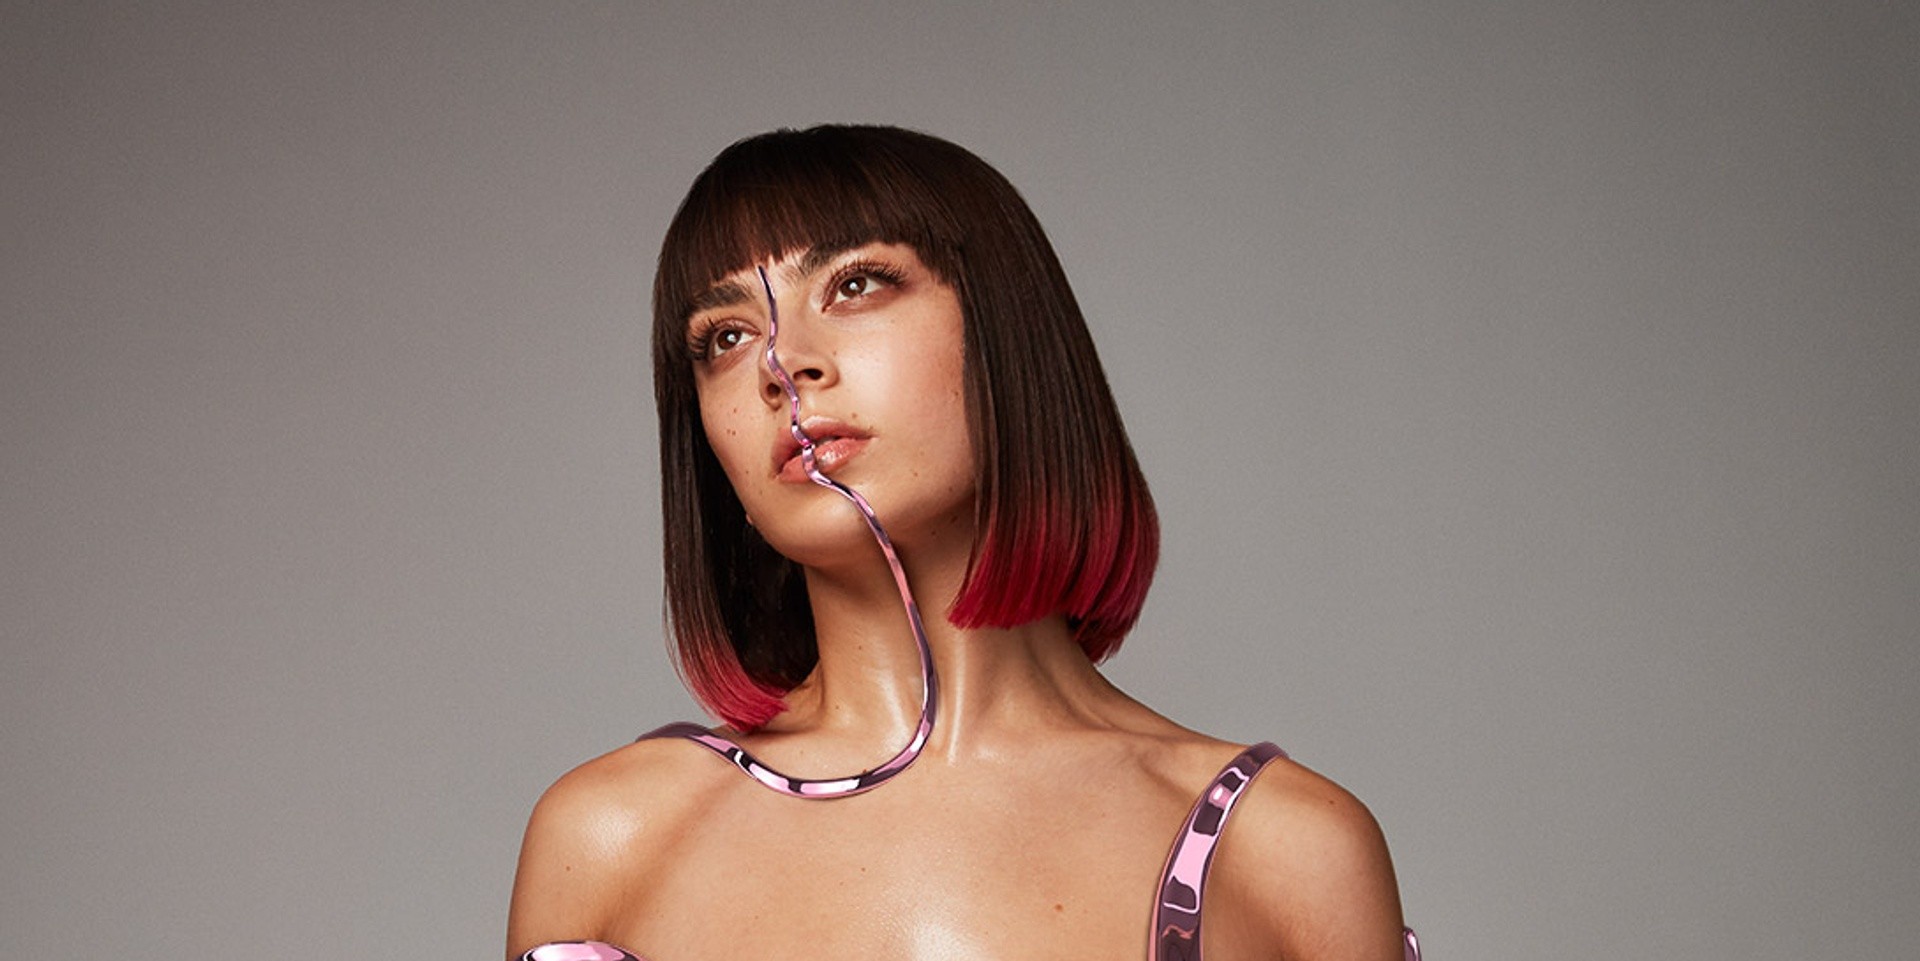 Charli XCX announces upcoming album, tour, new music video for ‘Blame It On Your Love ft. Lizzo’ – watch